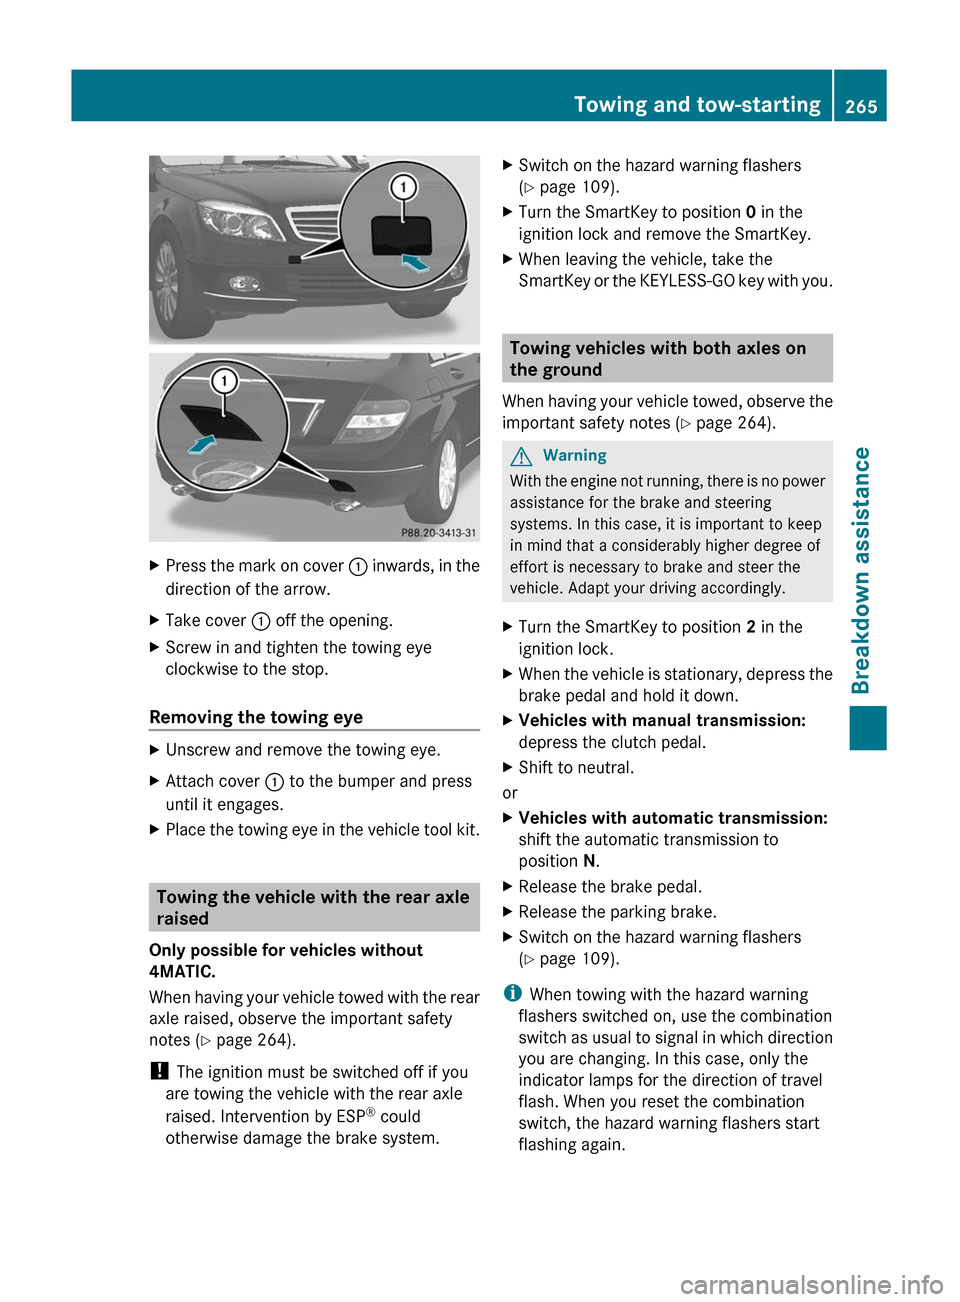 MERCEDES-BENZ C-Class 2011 W204 Owners Manual XPress the mark on cover : inwards, in the
direction of the arrow.
XTake cover : off the opening.XScrew in and tighten the towing eye
clockwise to the stop.
Removing the towing eye 
XUnscrew and remov